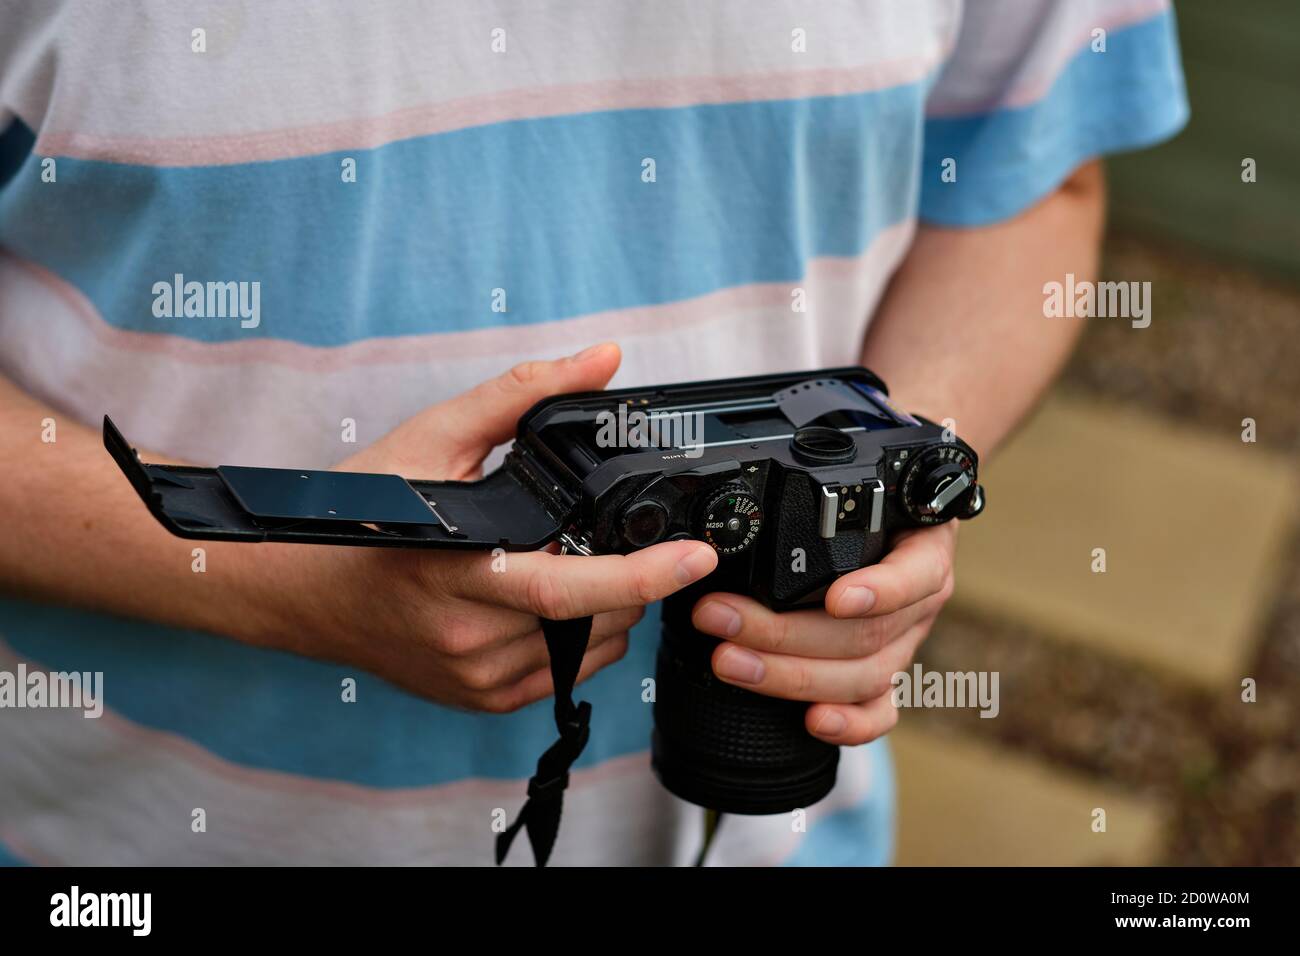 A young man loads photographic film into an analogue camera, a medium seeing a resurgence in recent years (MR) Stock Photo